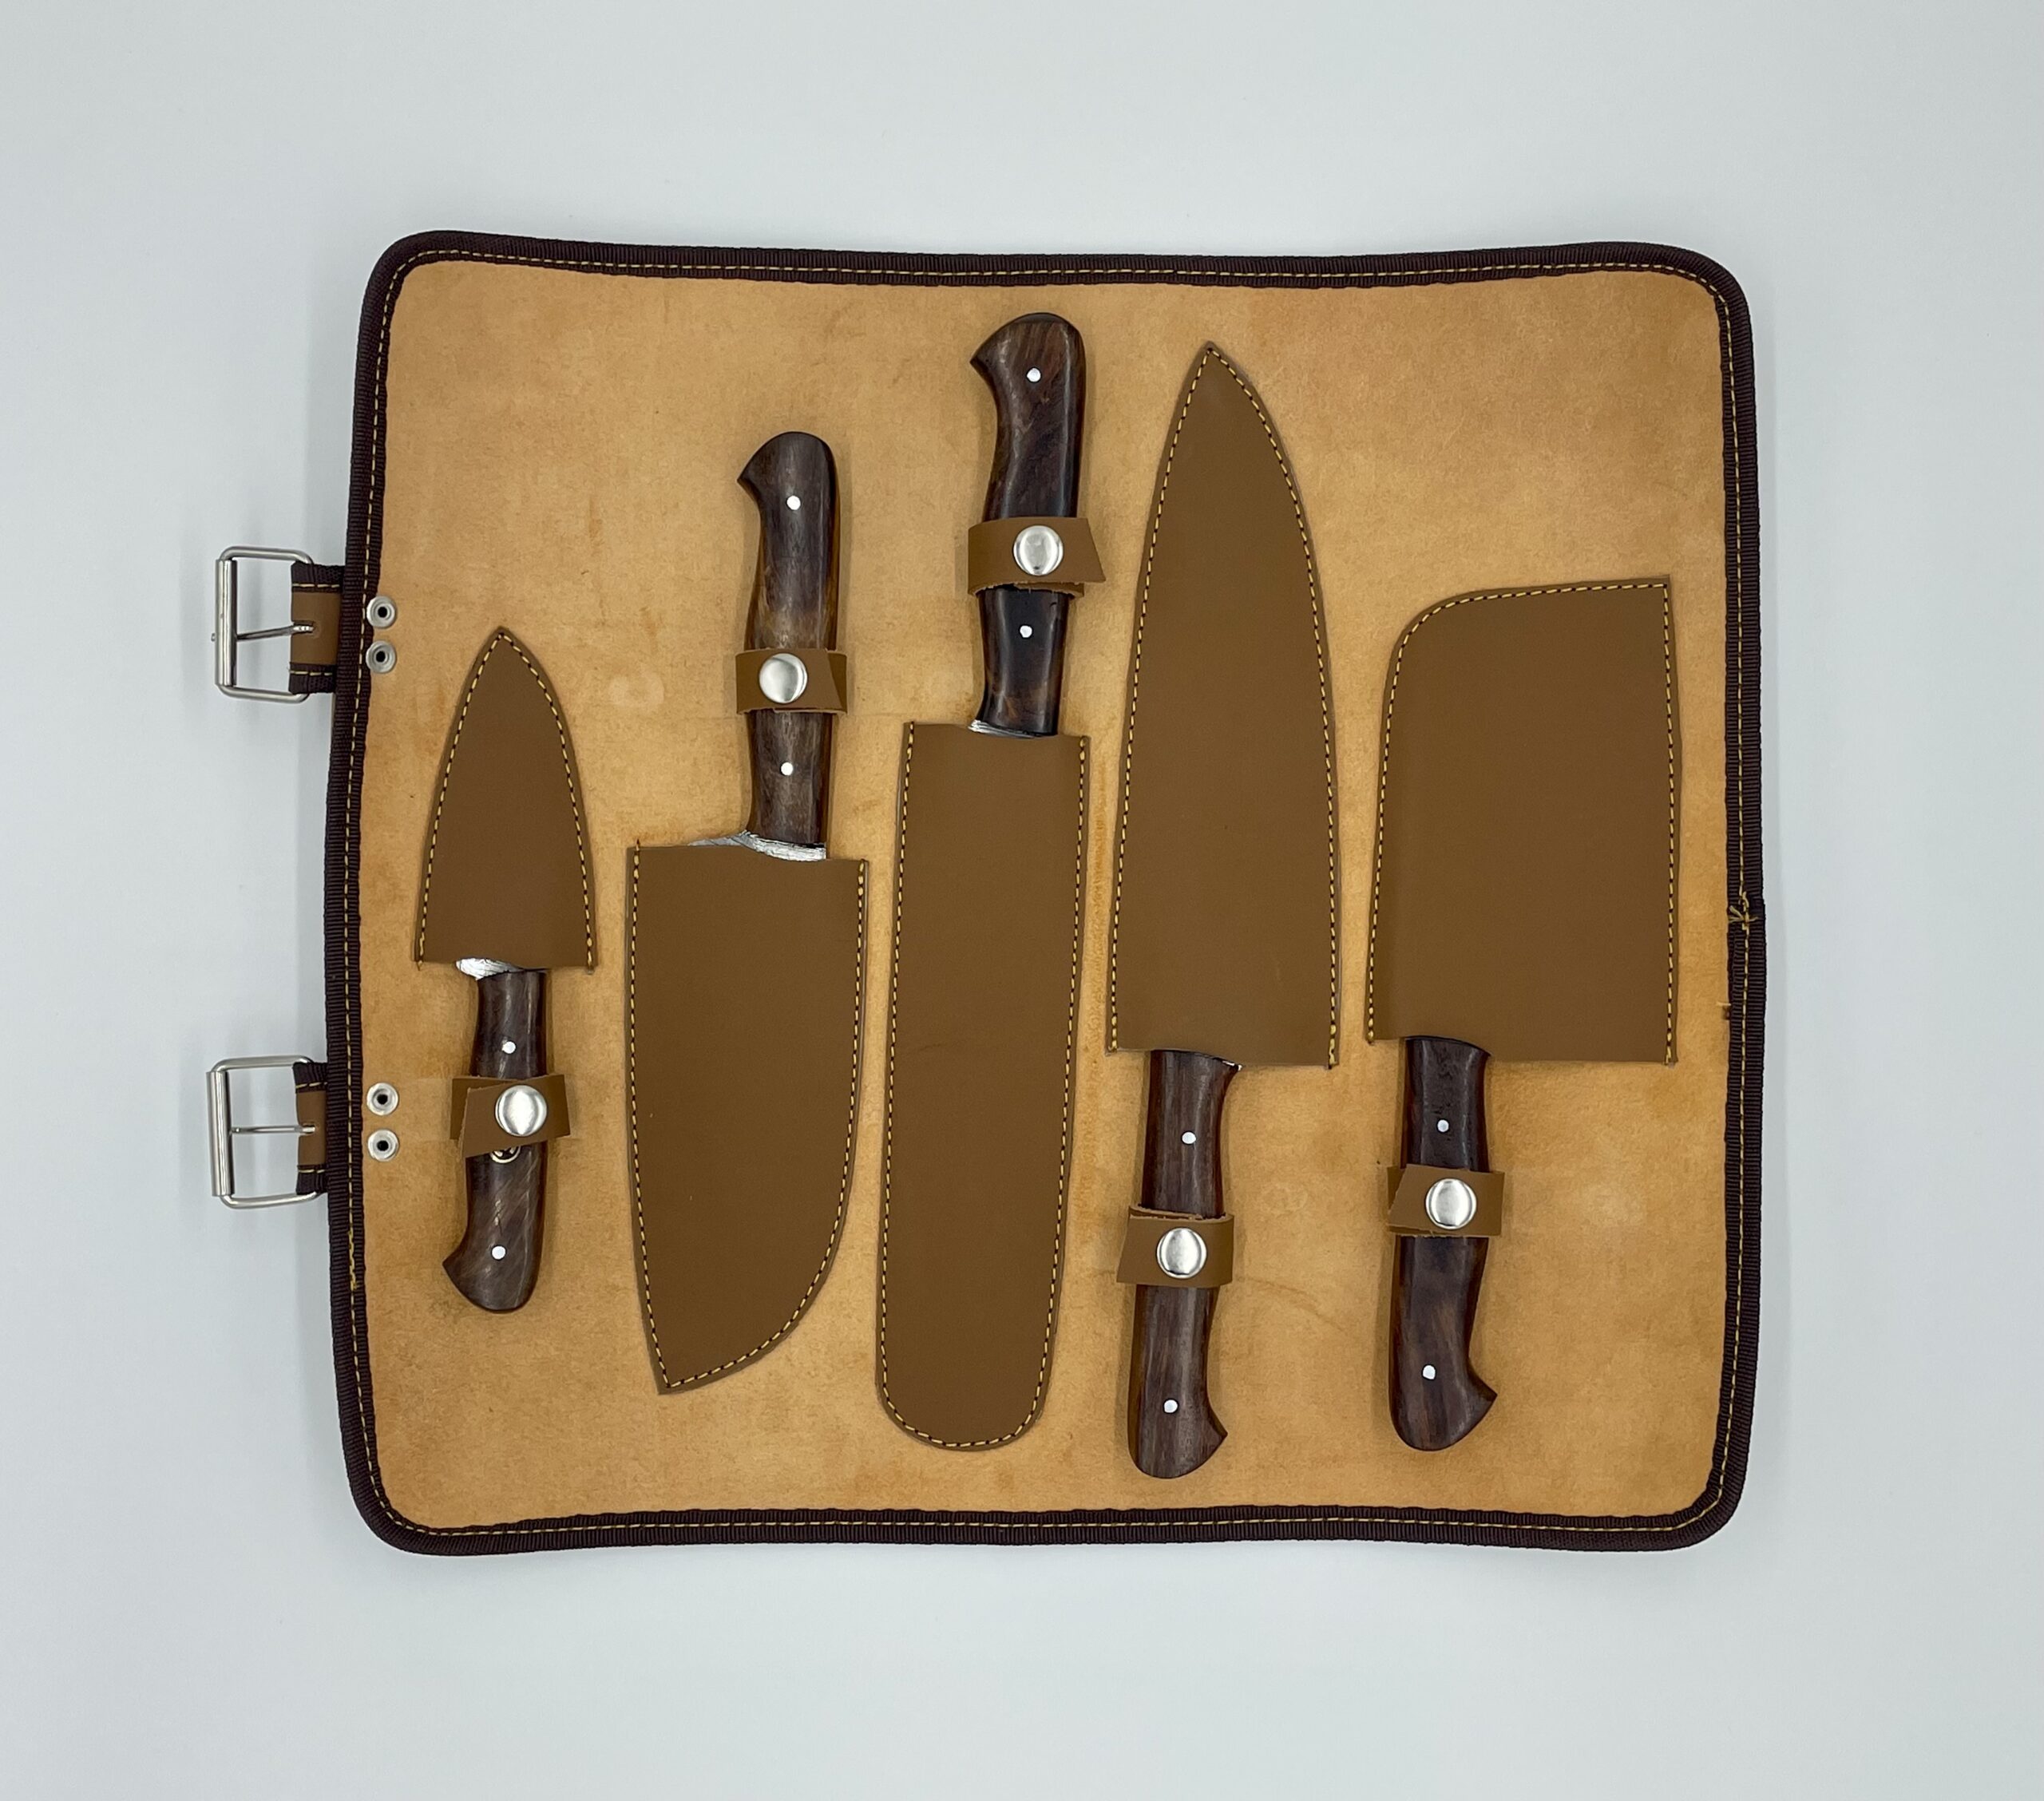 https://templarschoice.com/wp-content/uploads/2023/01/Damascus-Chef-Knives-with-Rosewood-Handles-5-Knife-Set-2-scaled.jpg